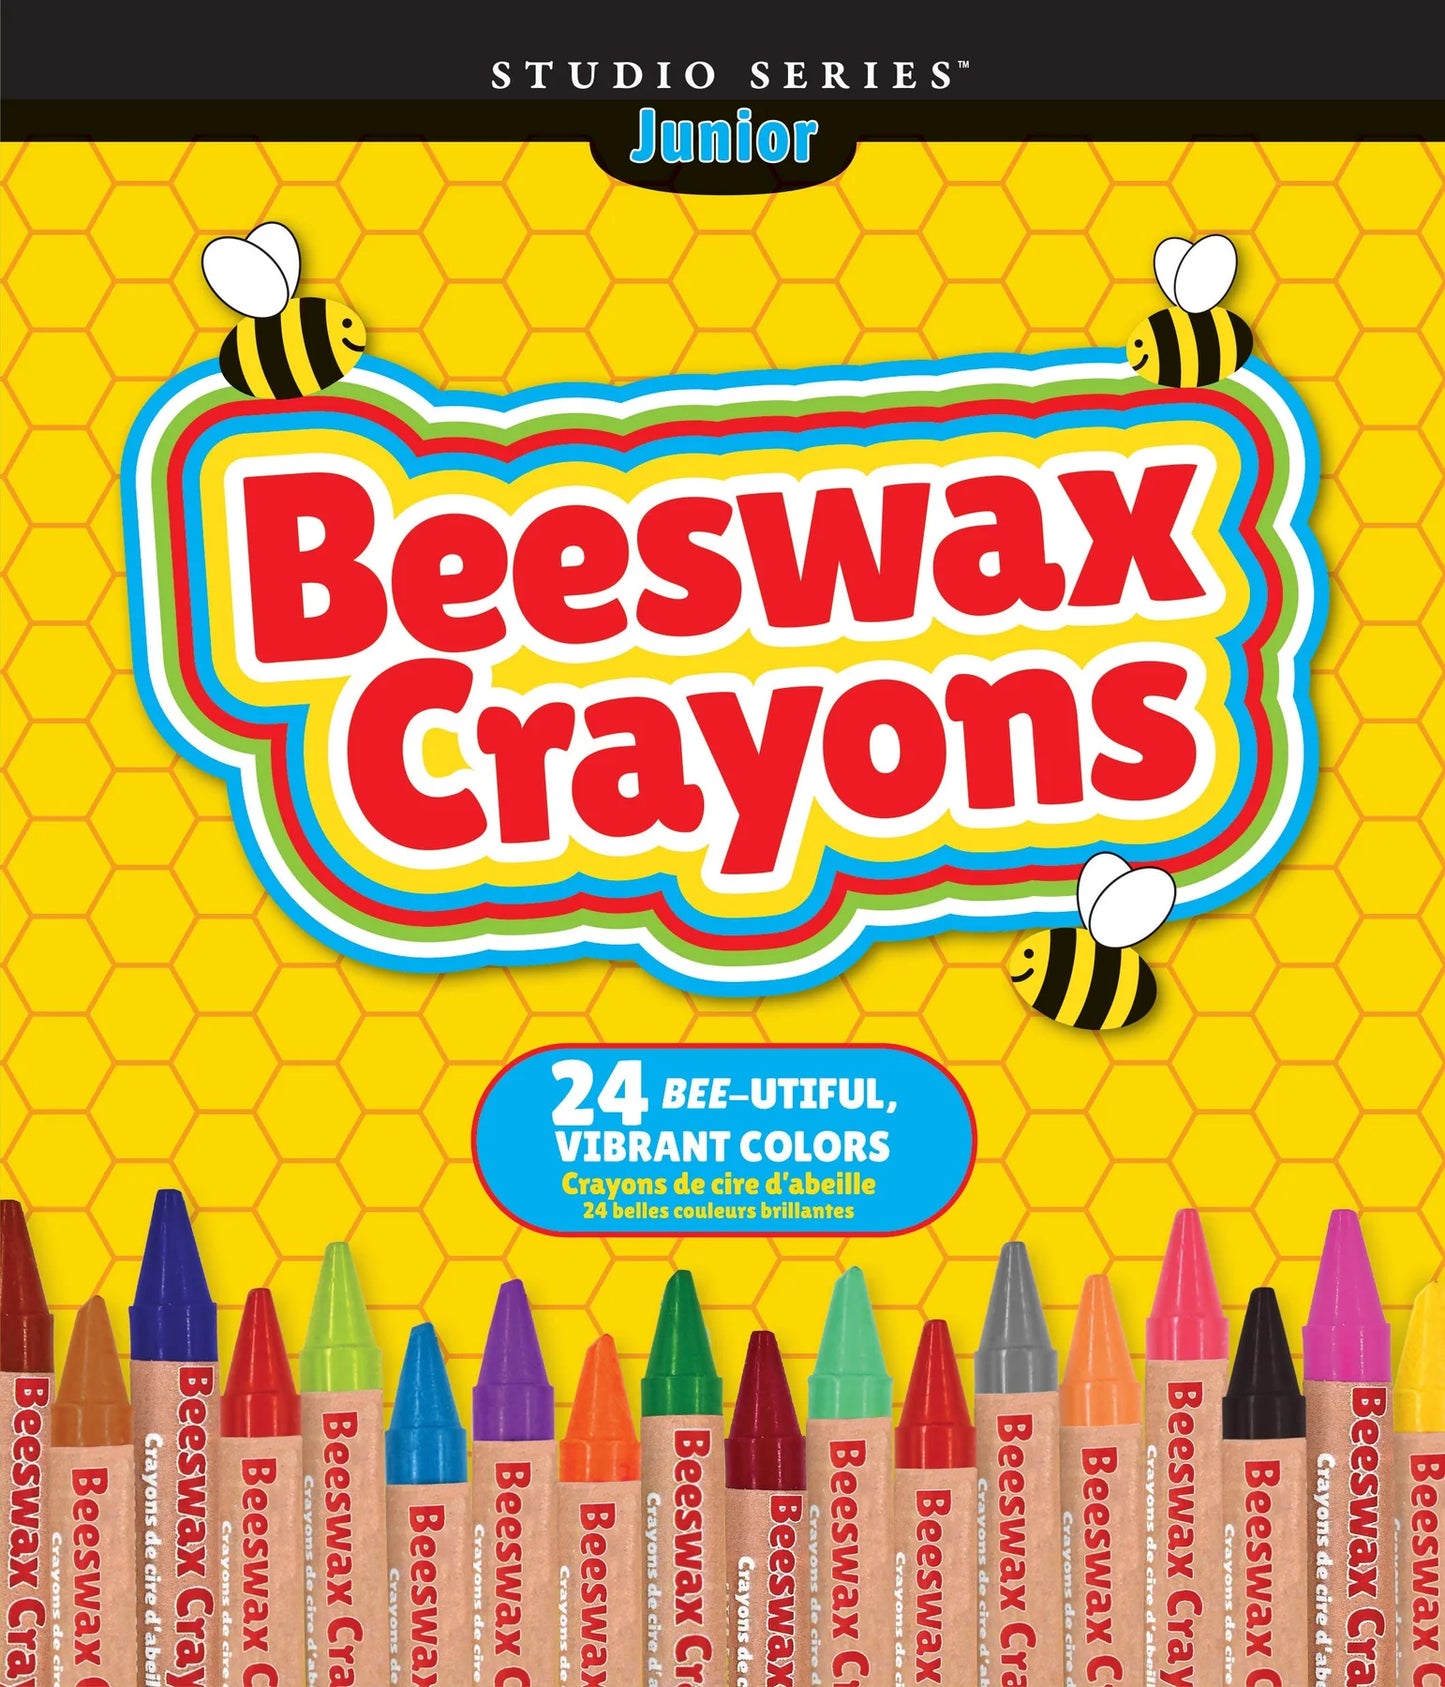 Beeswax Crayons (Set of 24 Colors)